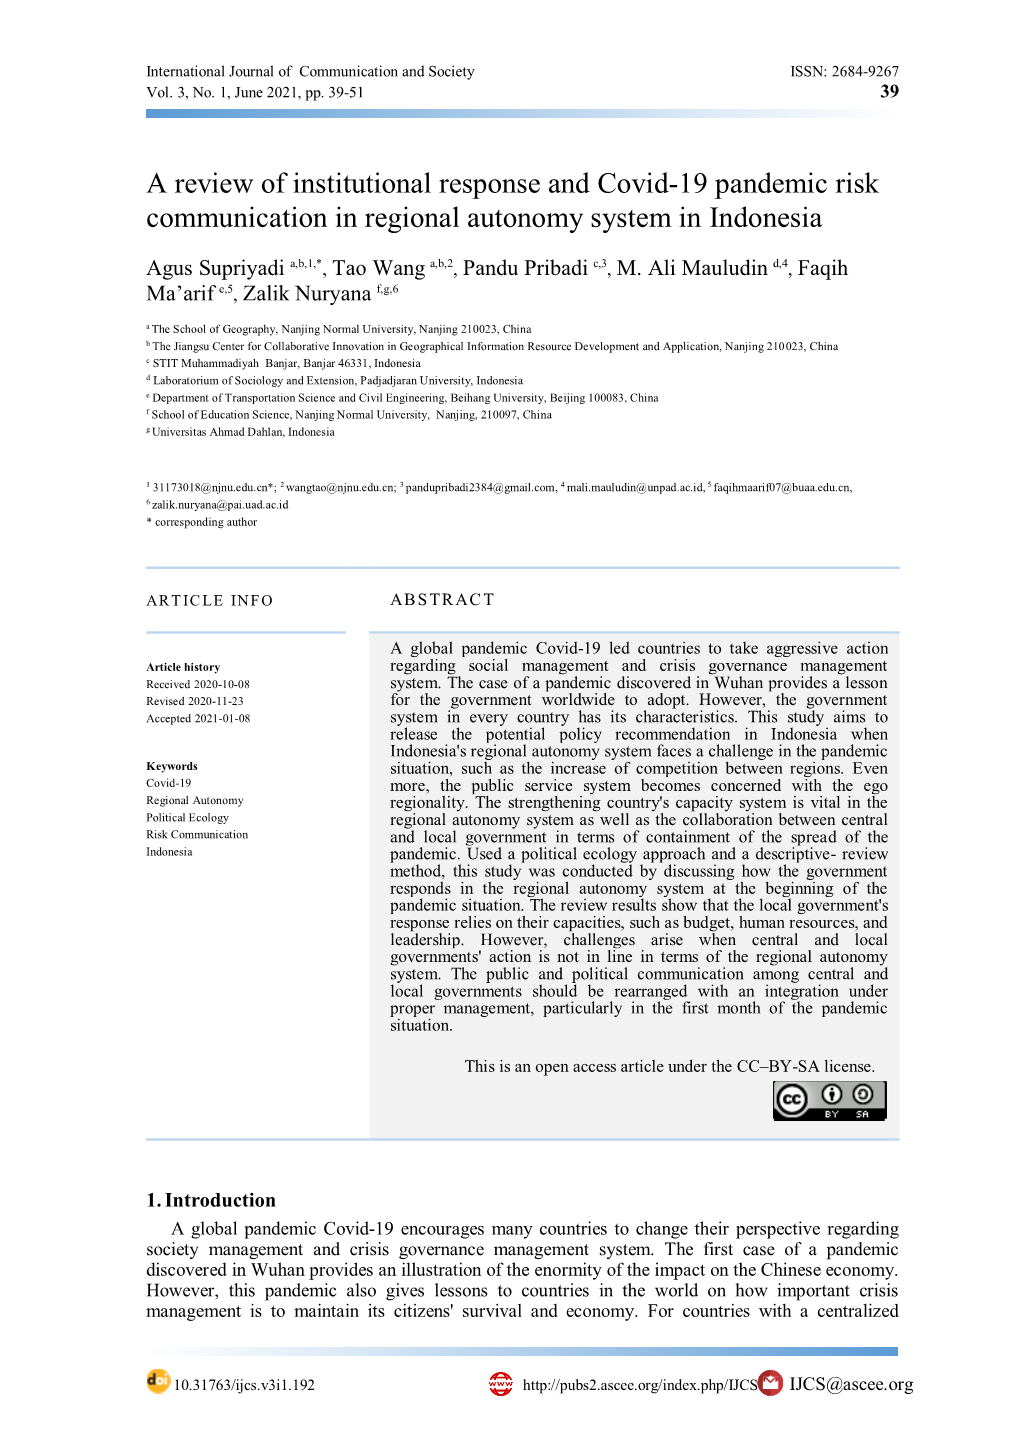 A Review of Institutional Response and Covid-19 Pandemic Risk Communication in Regional Autonomy System in Indonesia